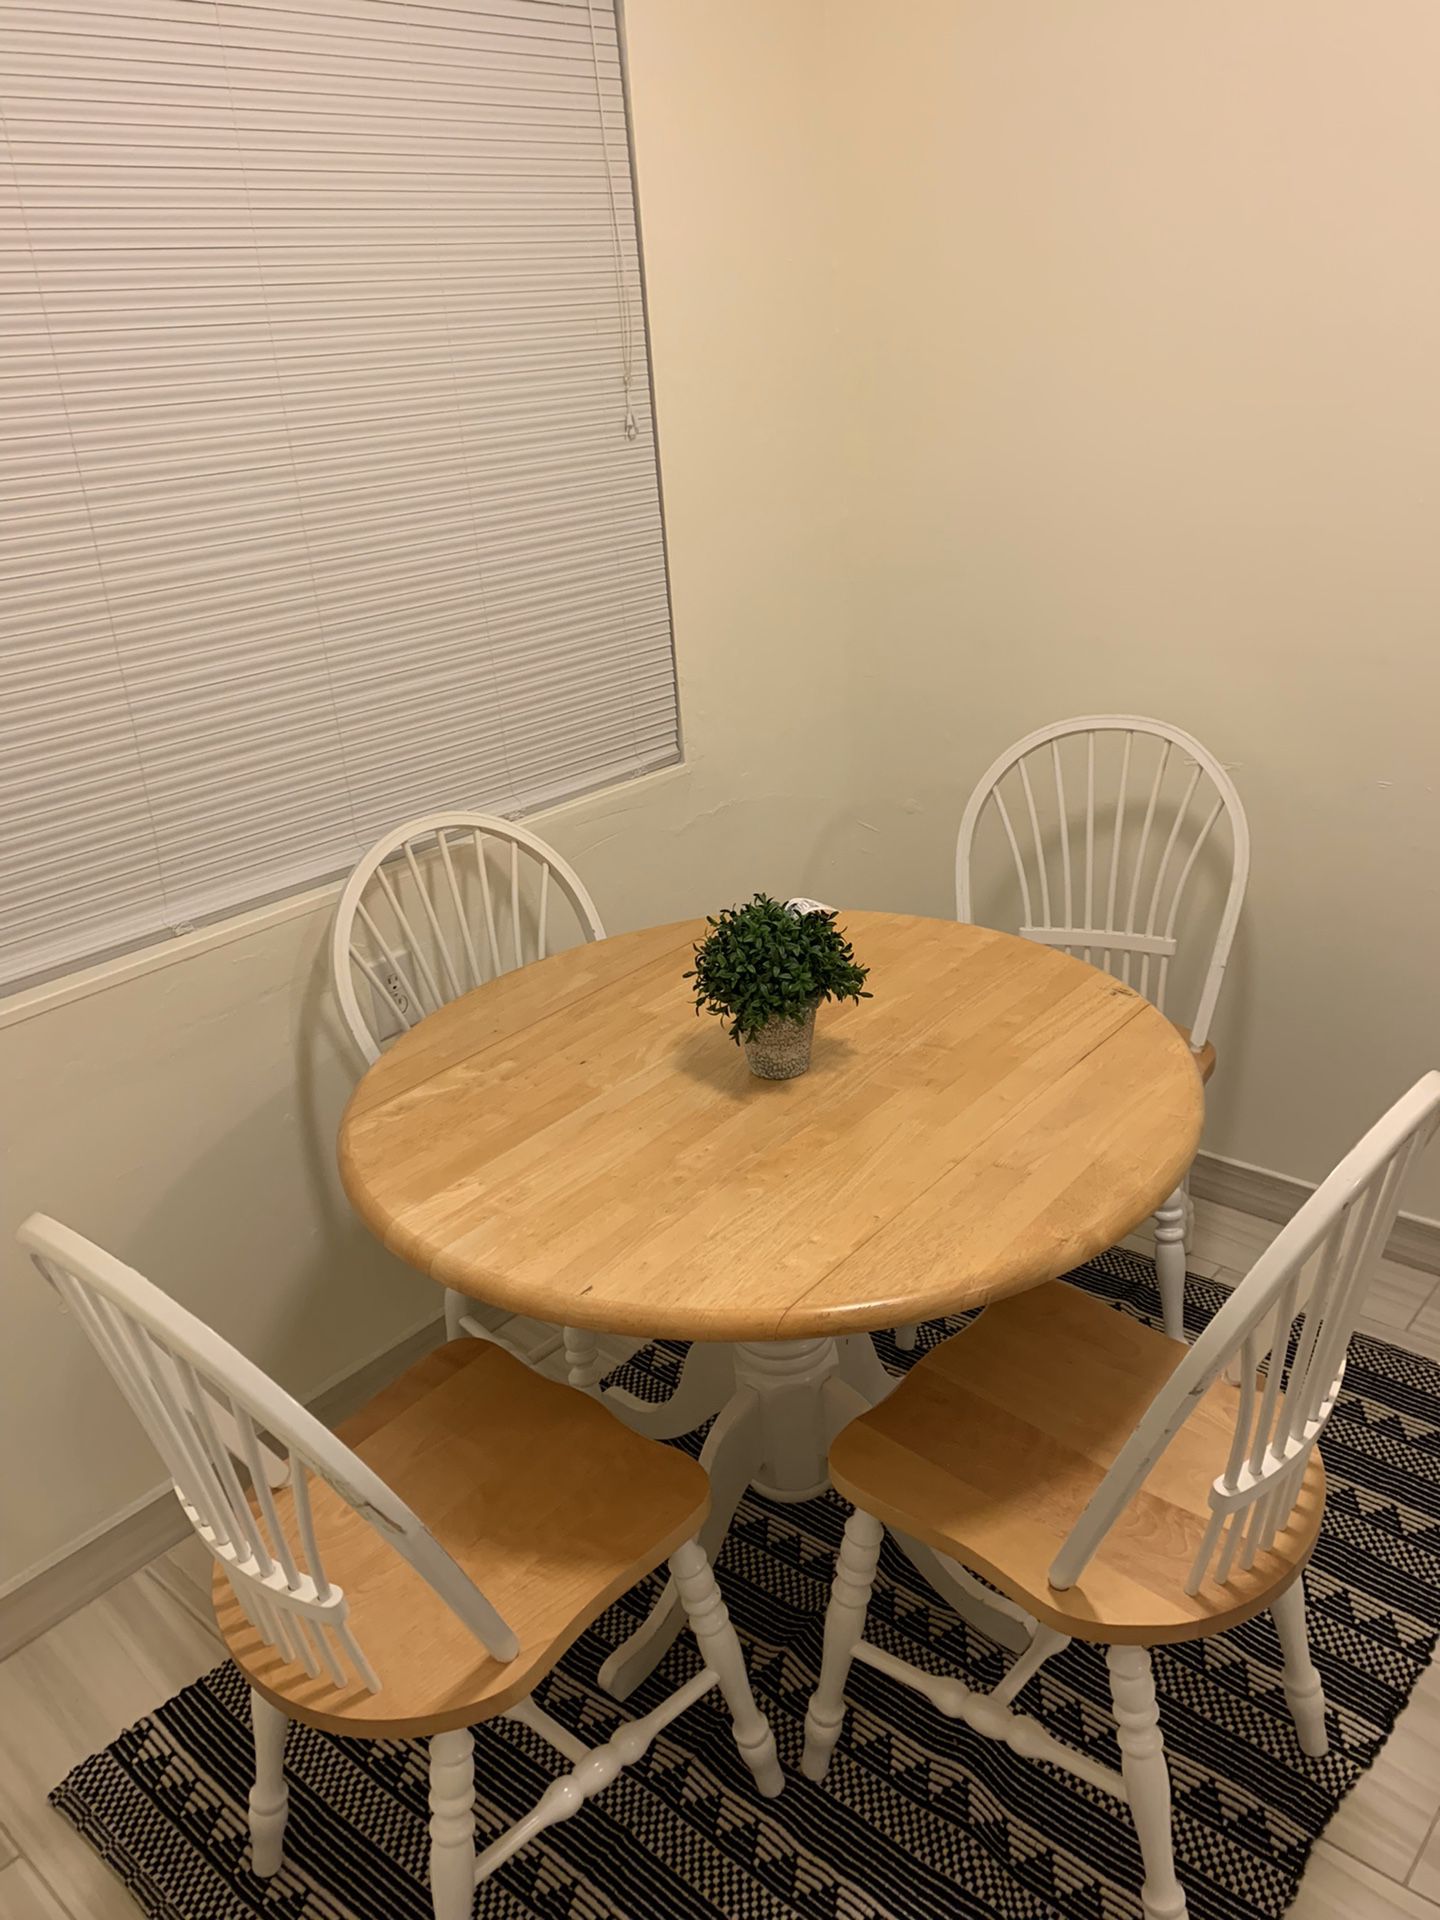 Wood kitchen table and chairs set